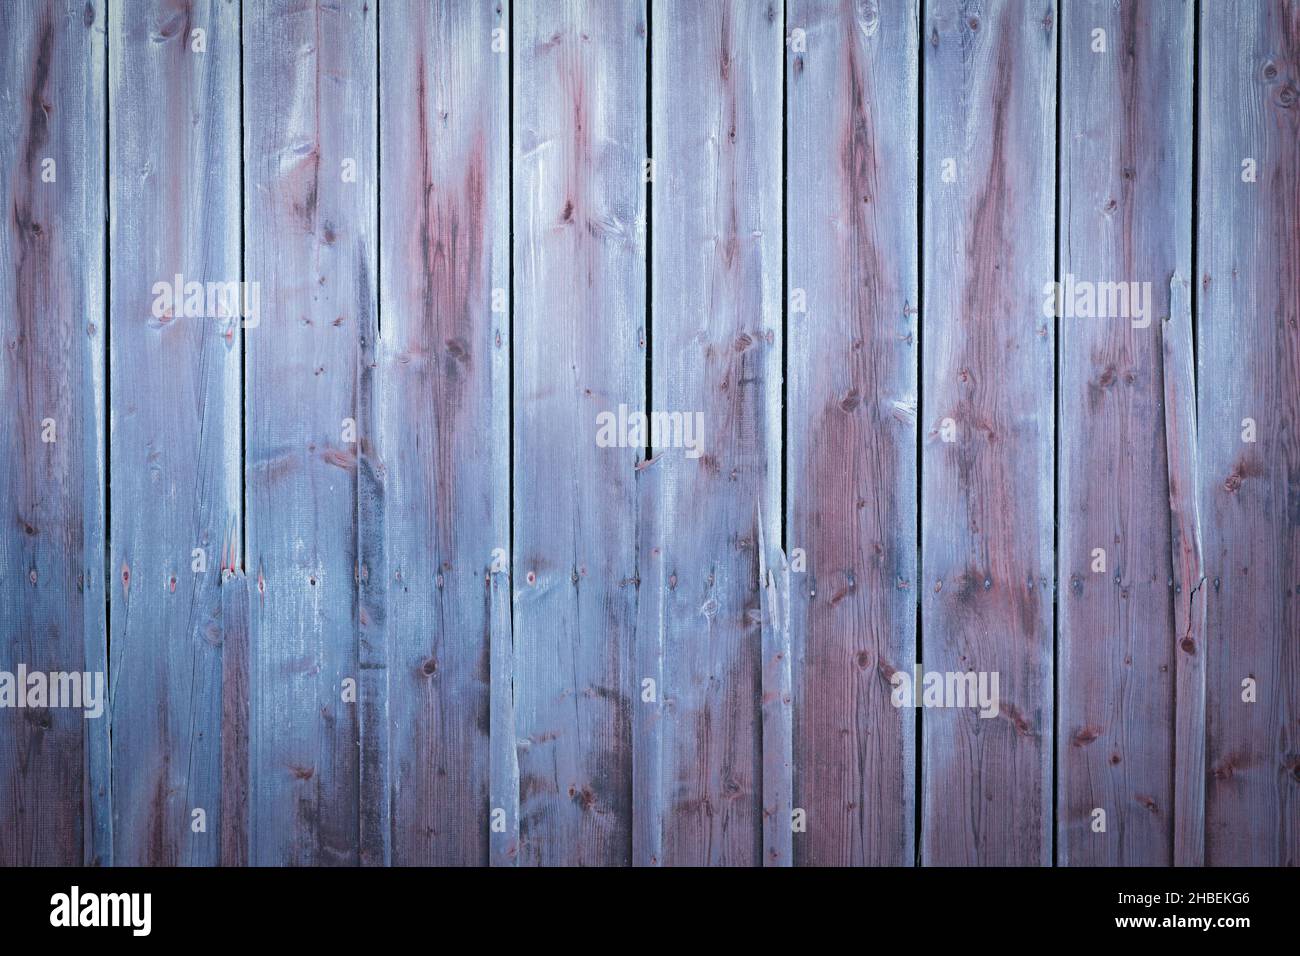 Blue and purple wood background with weathered planks with fading colors Stock Photo